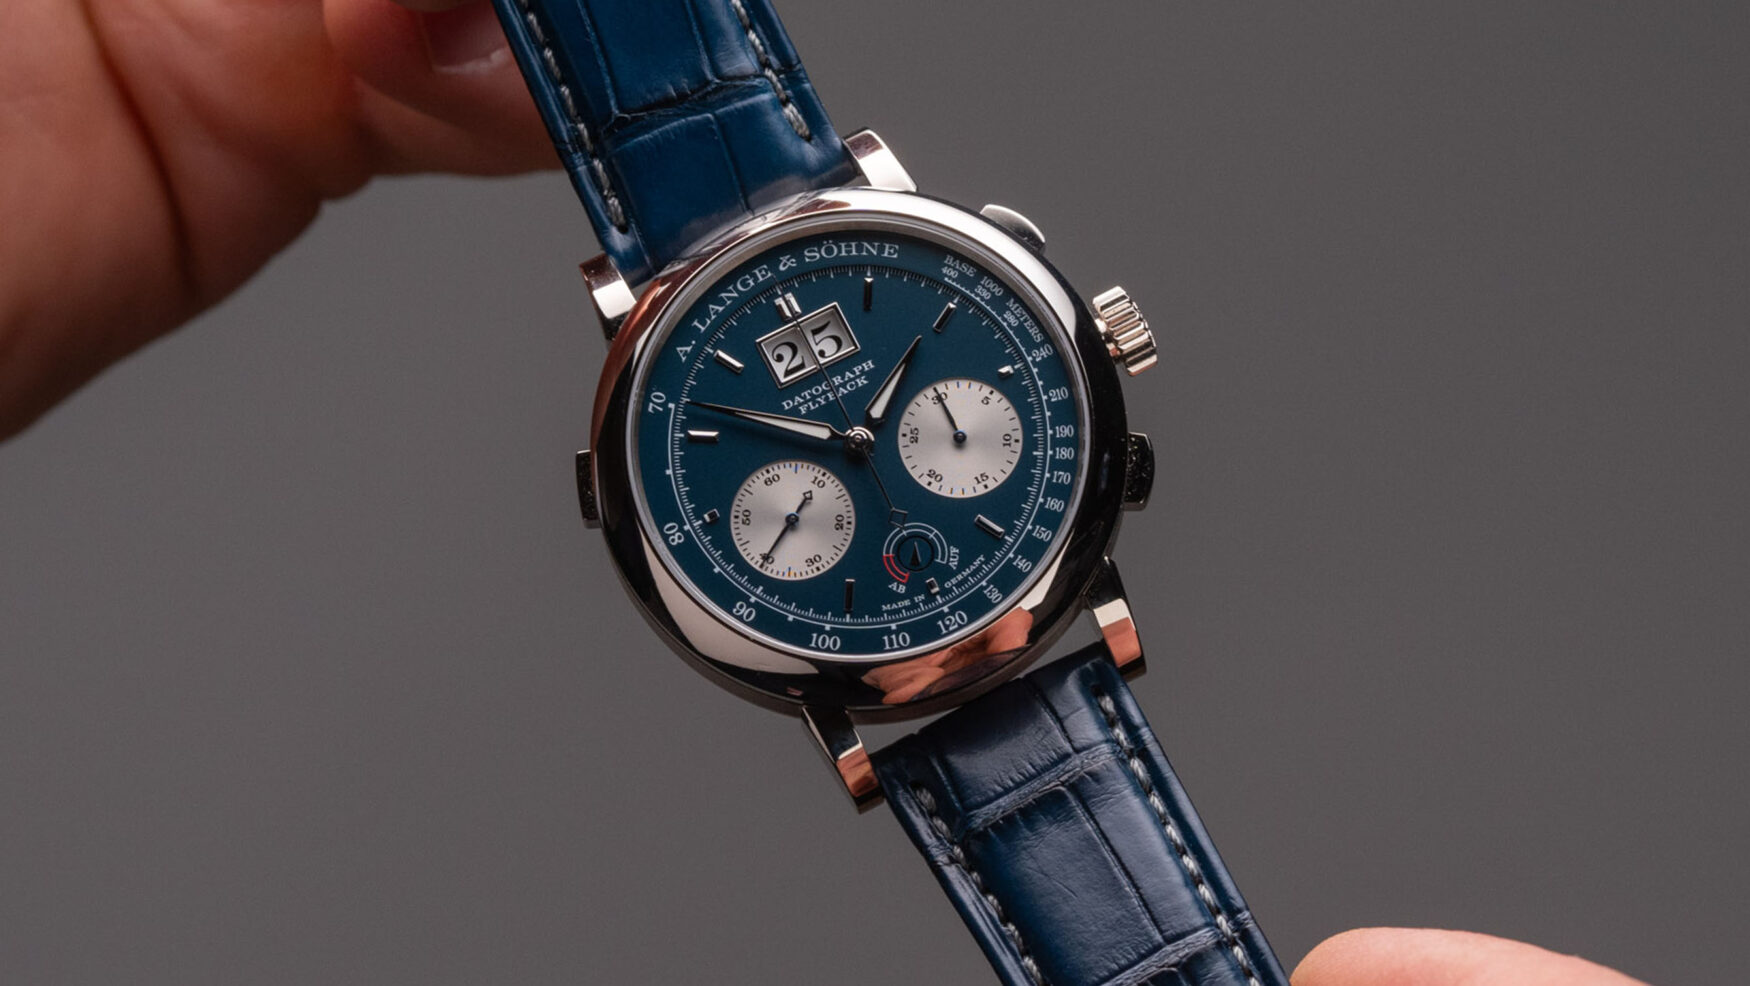 The A. Lange & Söhne Datograph Up/Down gets a sporty lift in blue